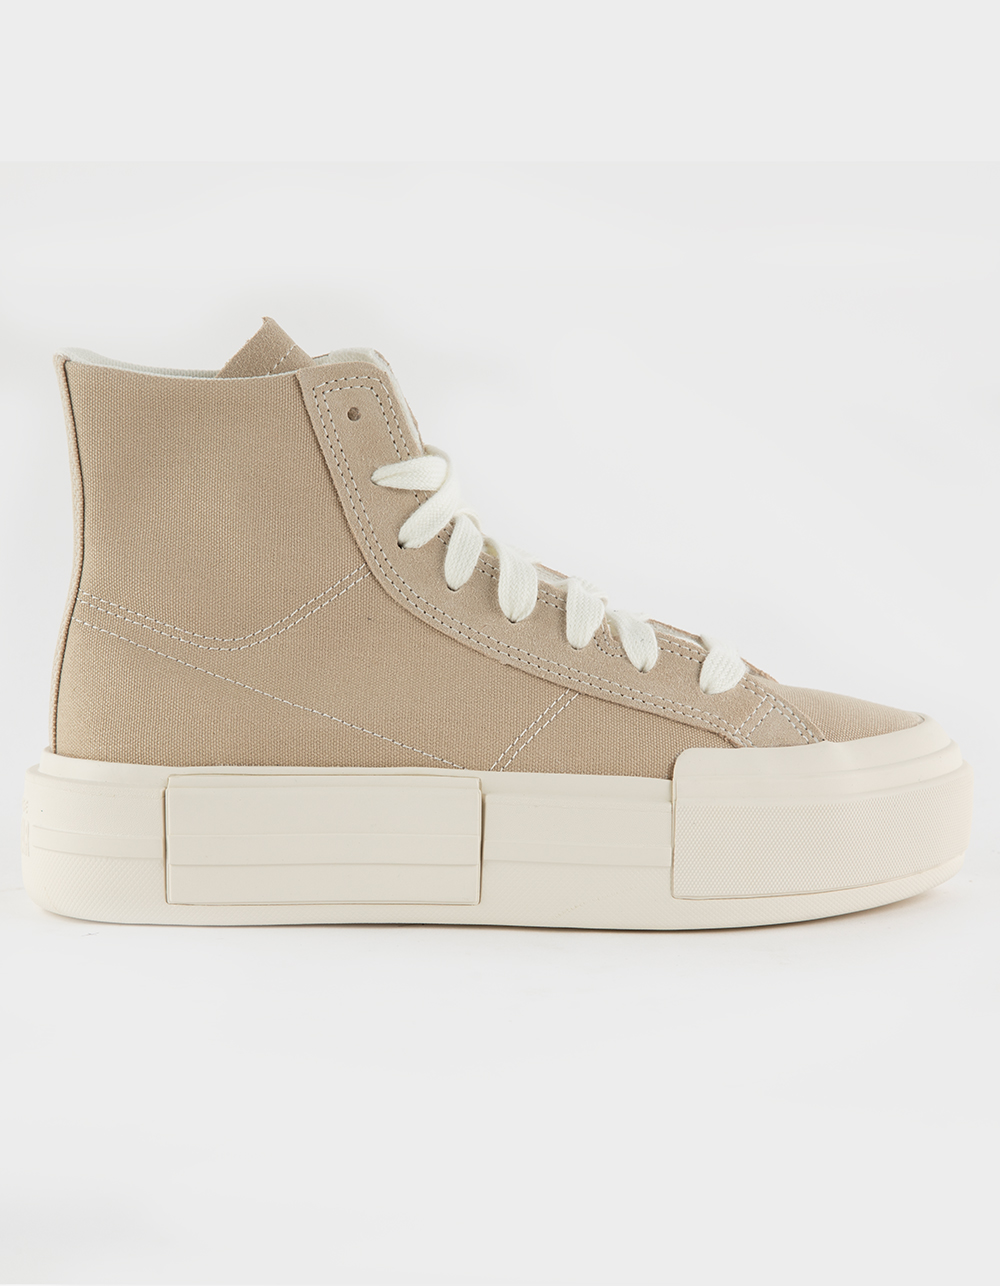 CONVERSE Chuck Taylor All Star Cruise Womens High Top Shoes - BEIGE ...